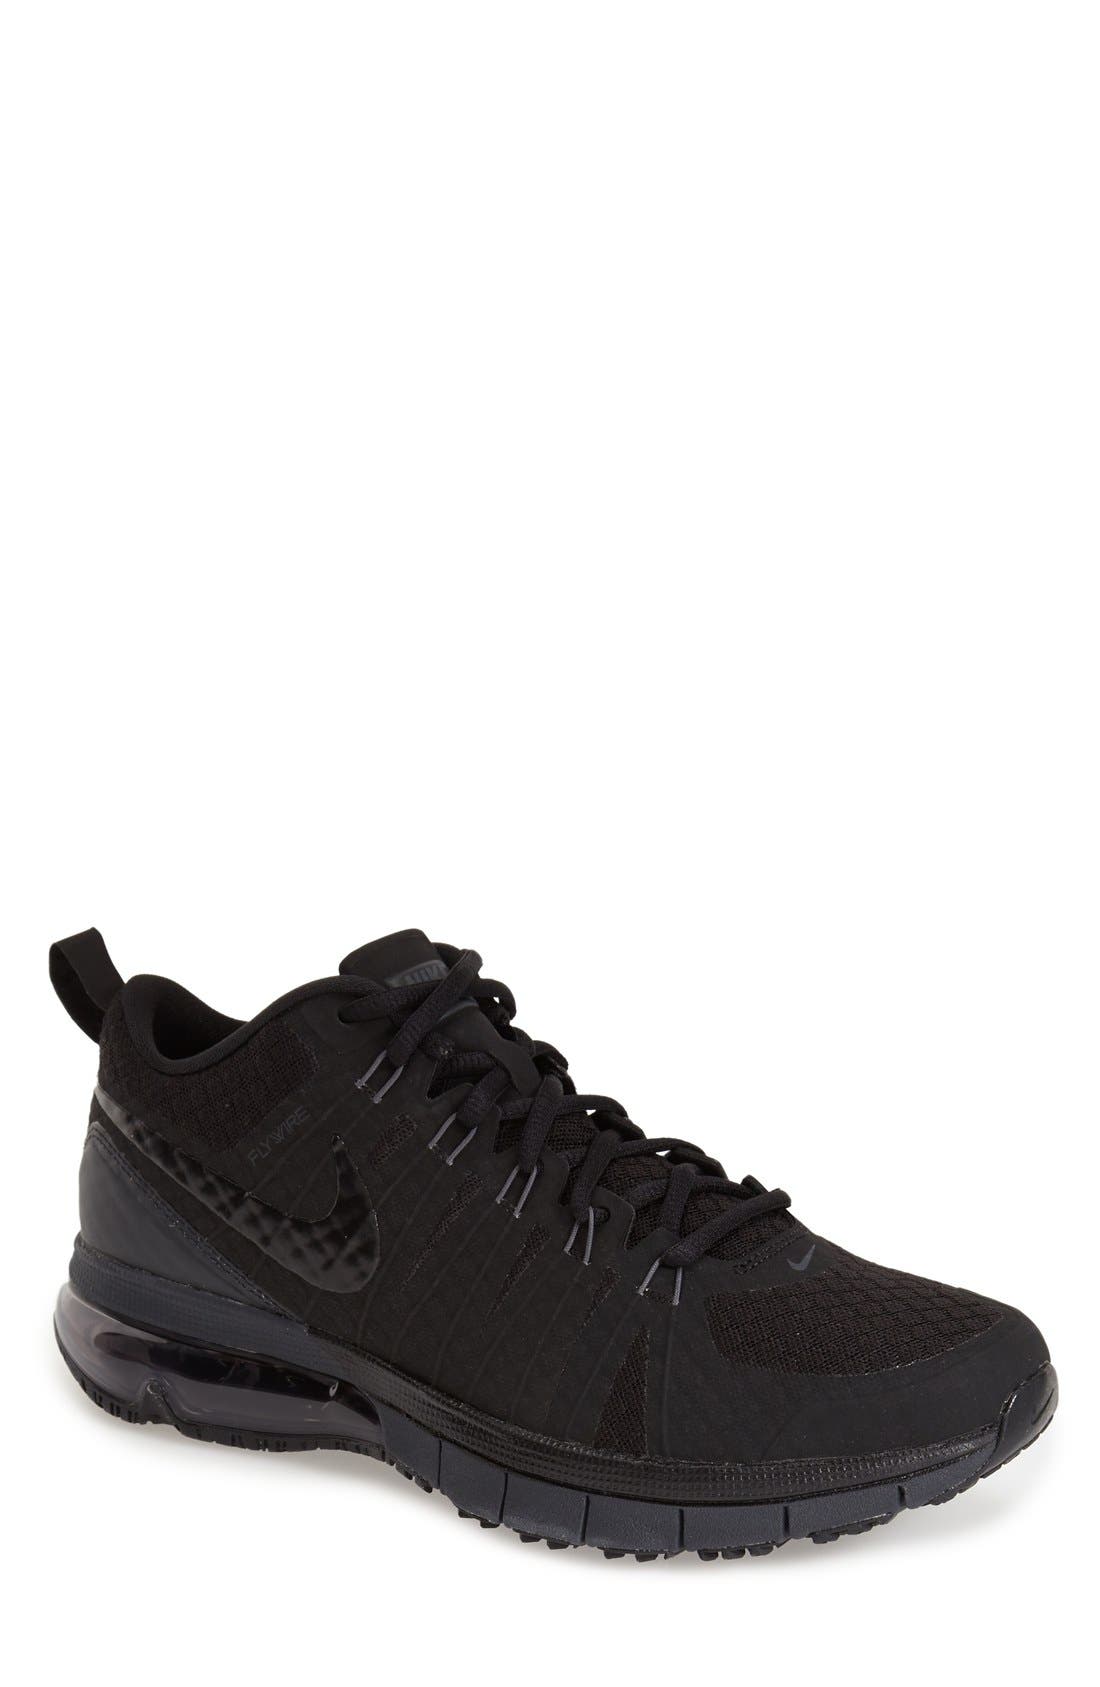 nike air max tr 180 flywire